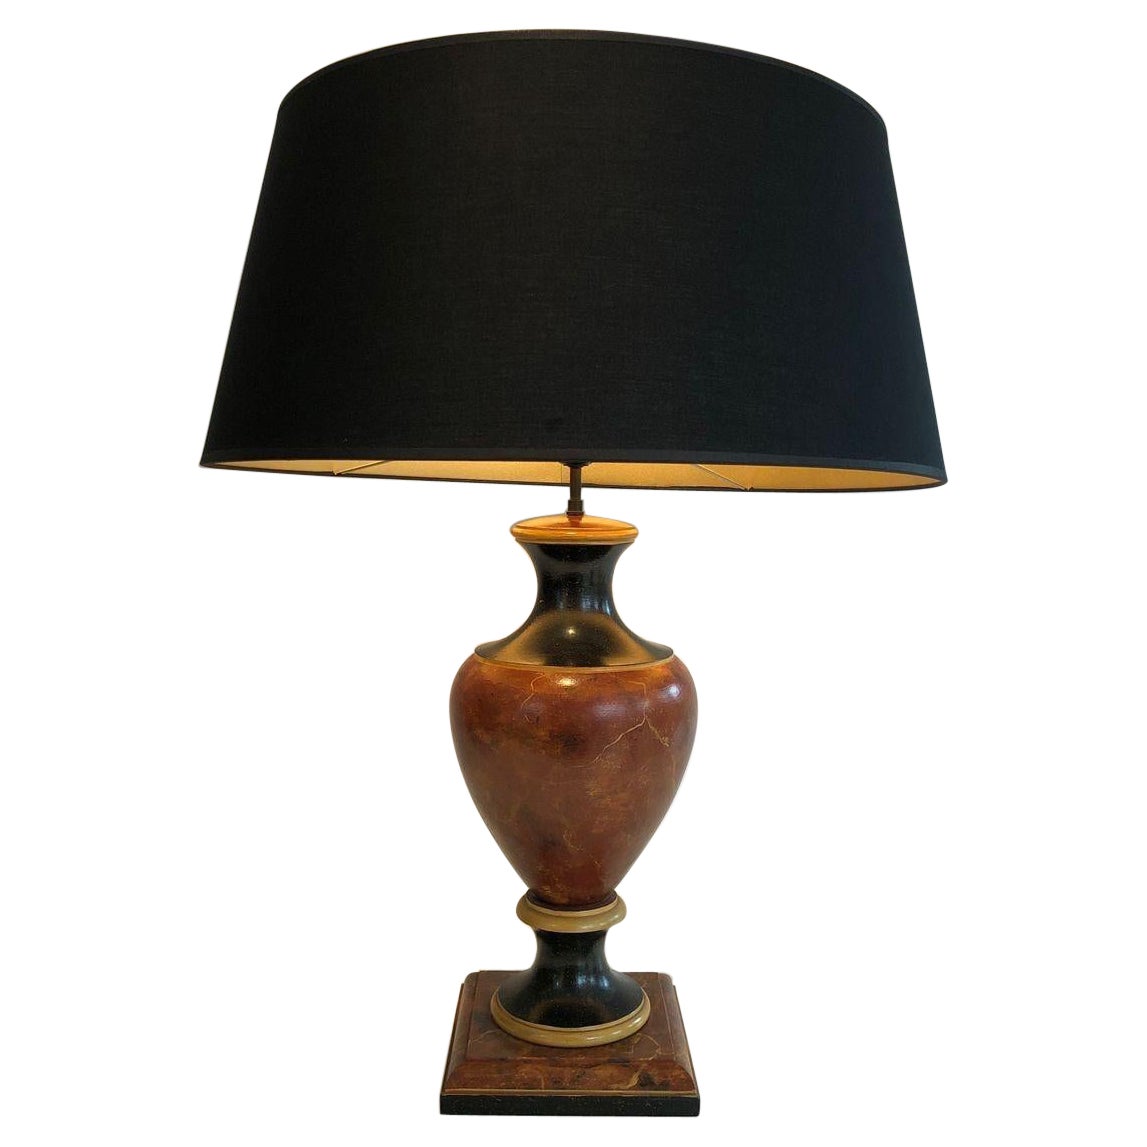 Painted Baluster Wooden Table Lamp